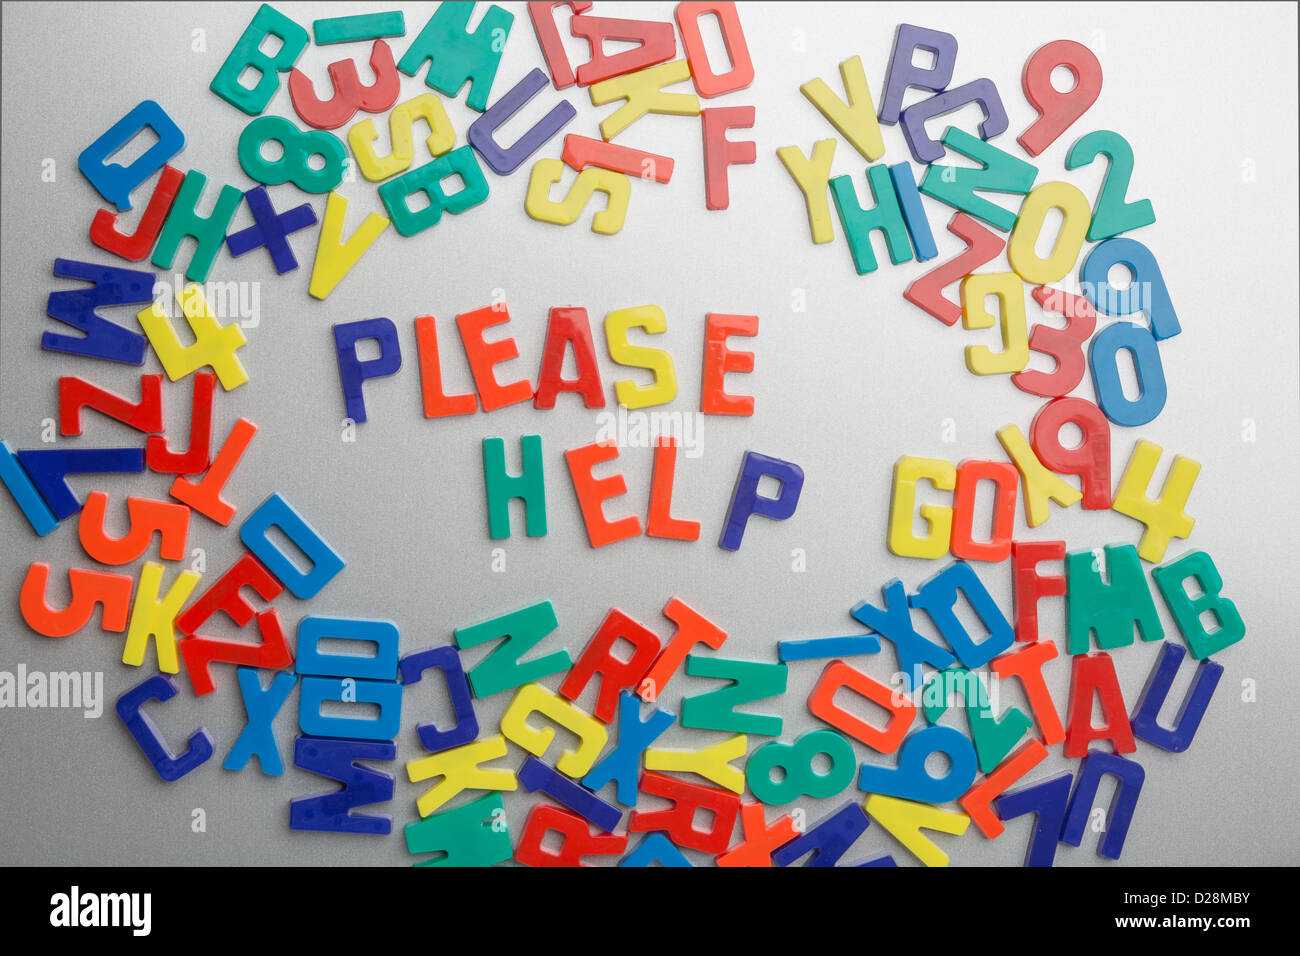 'Please help' - Refrigerator magnets spell messages out of a jumble of letters Stock Photo